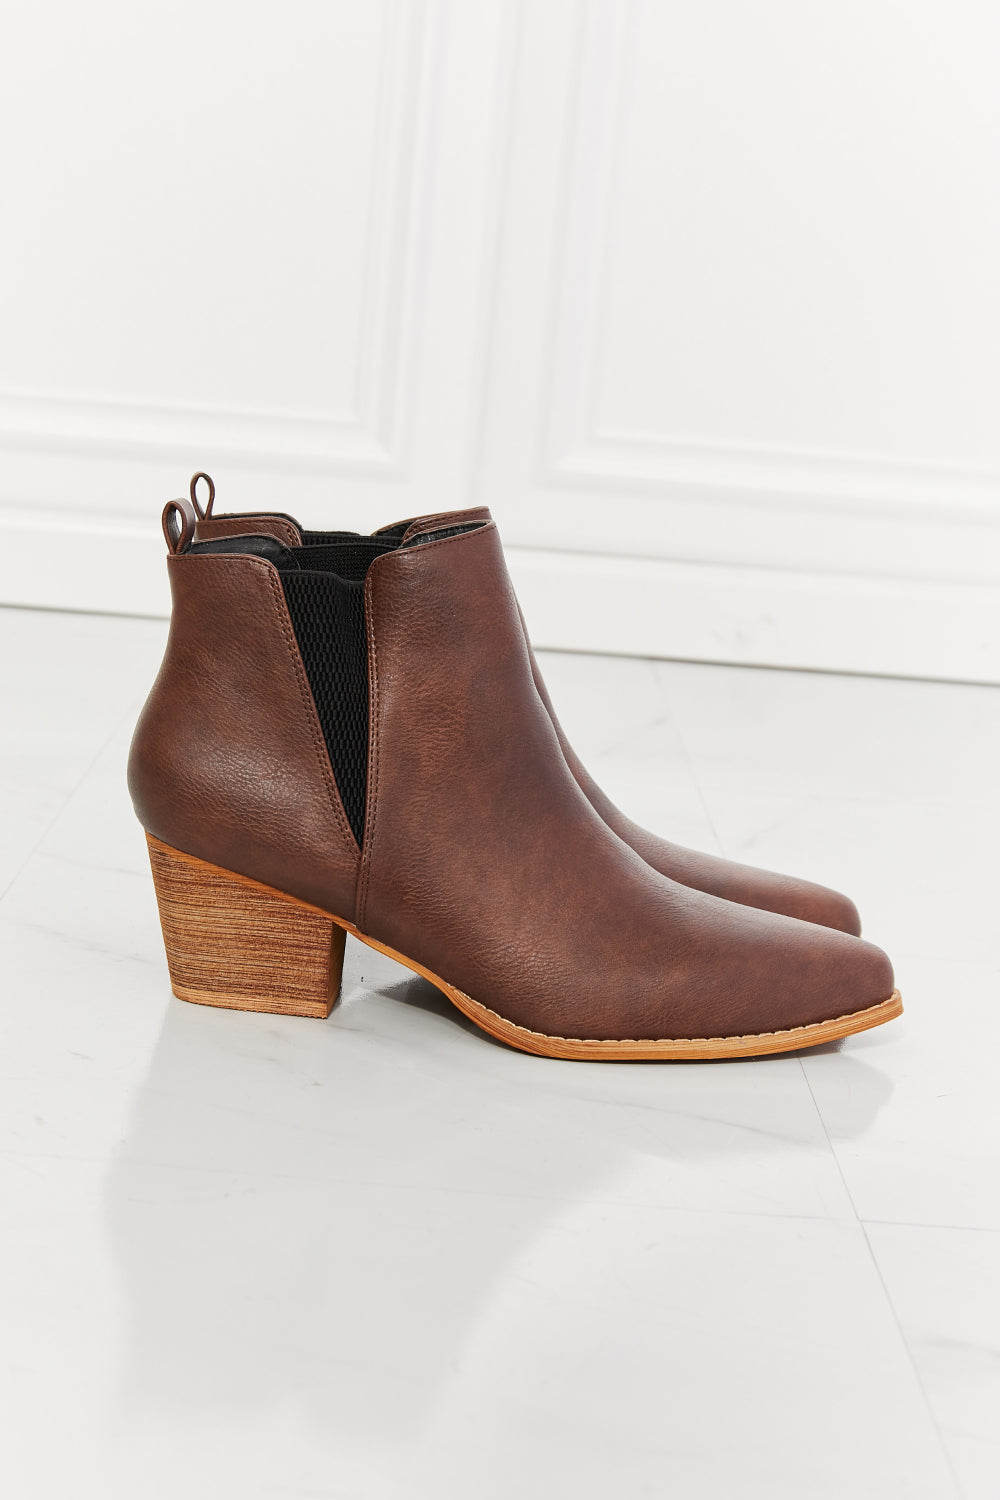 Leona - Point Toe Bootie in Chocolate